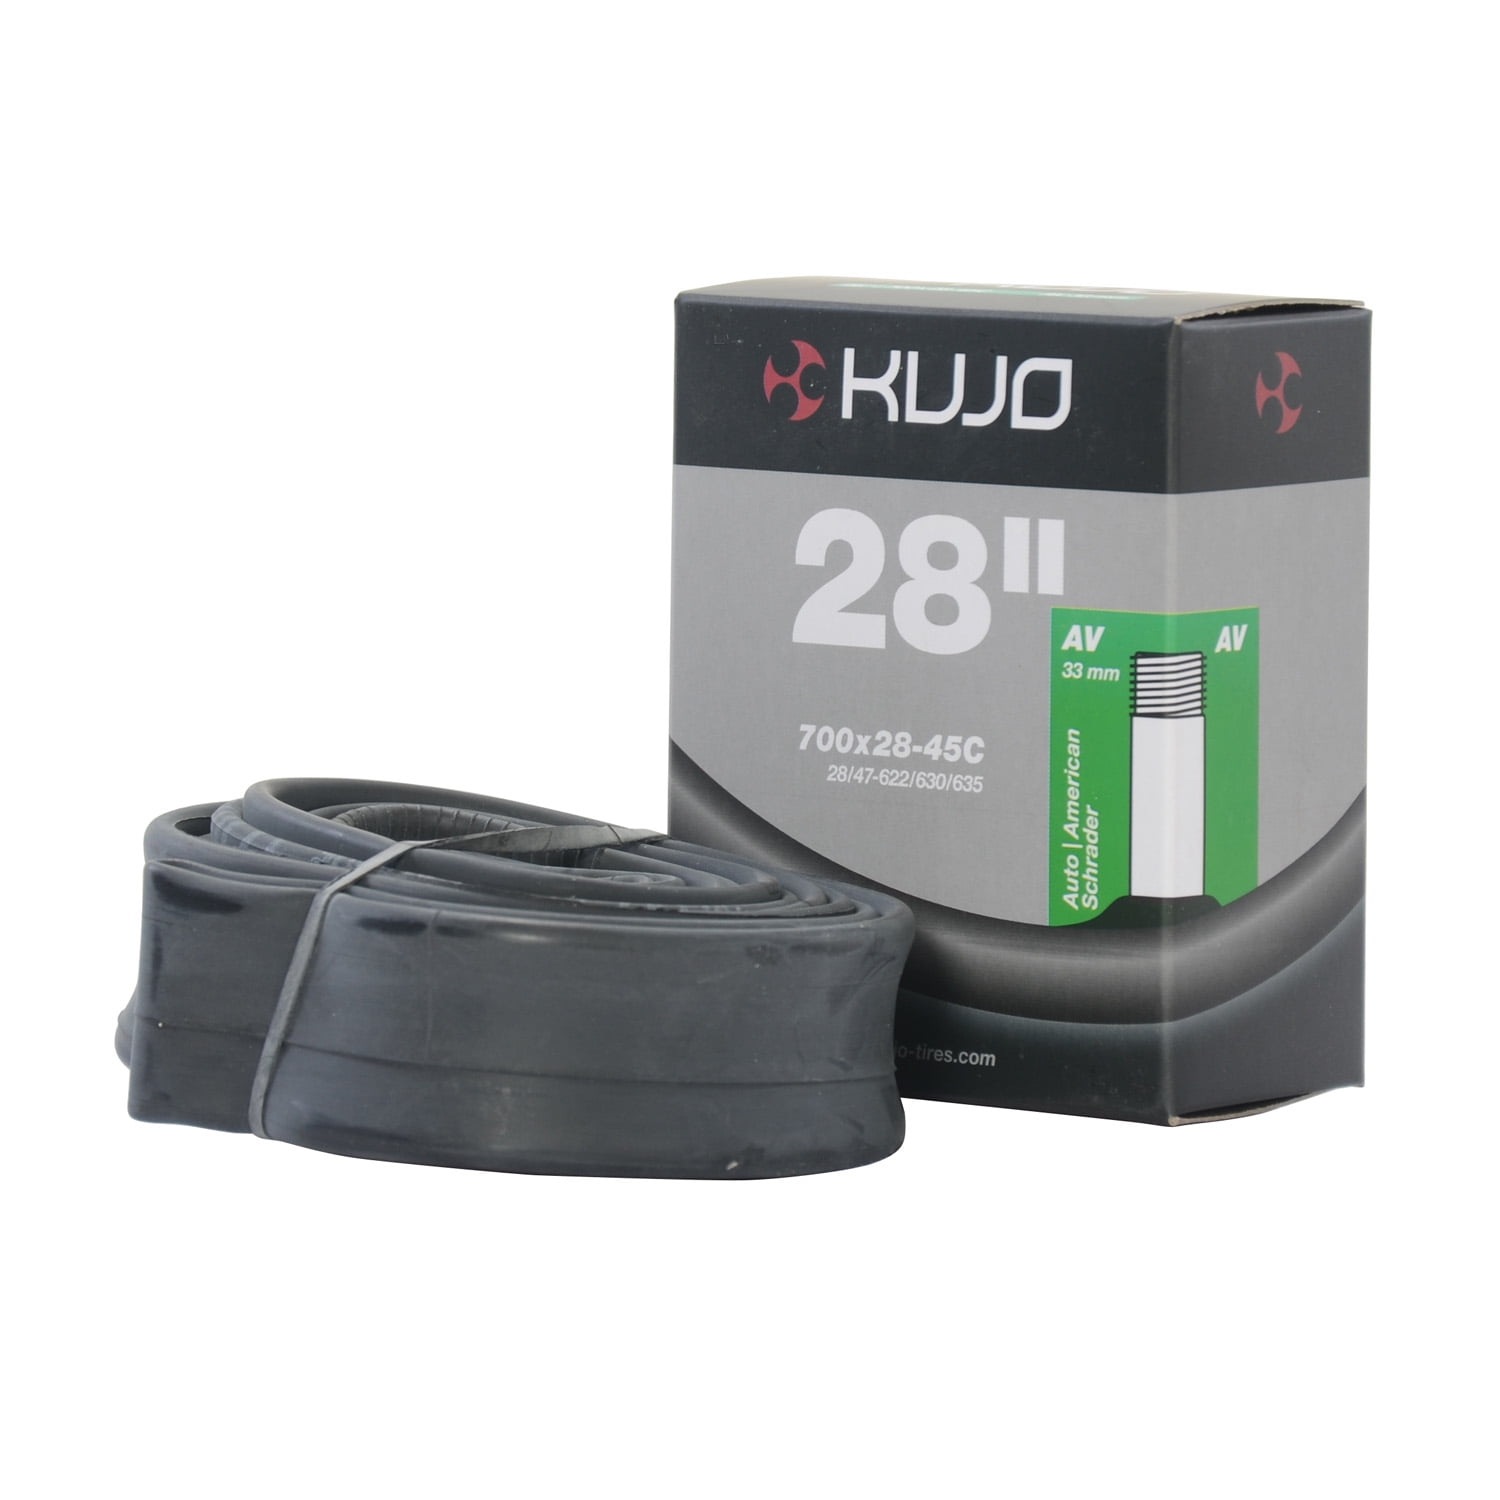 Kujo 12.5 x 2.125 in Schrader (American) - 33 mm Bicycle Tube (2 pack)